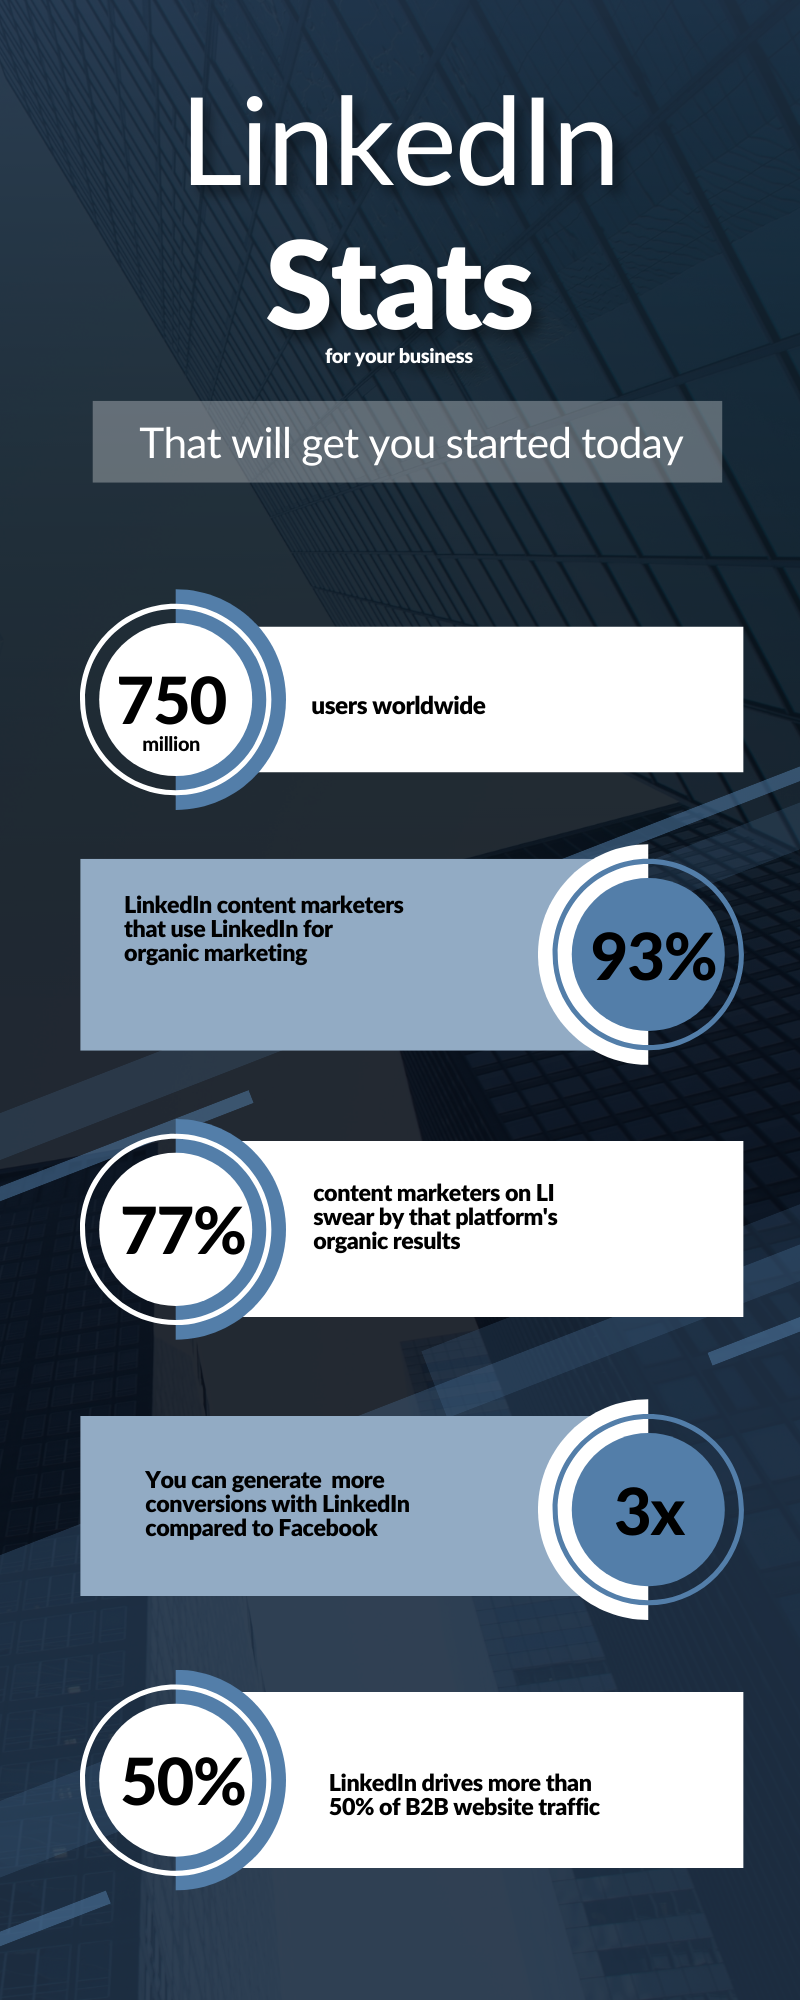 This infographic displays the many LinkedIn marketing benefits